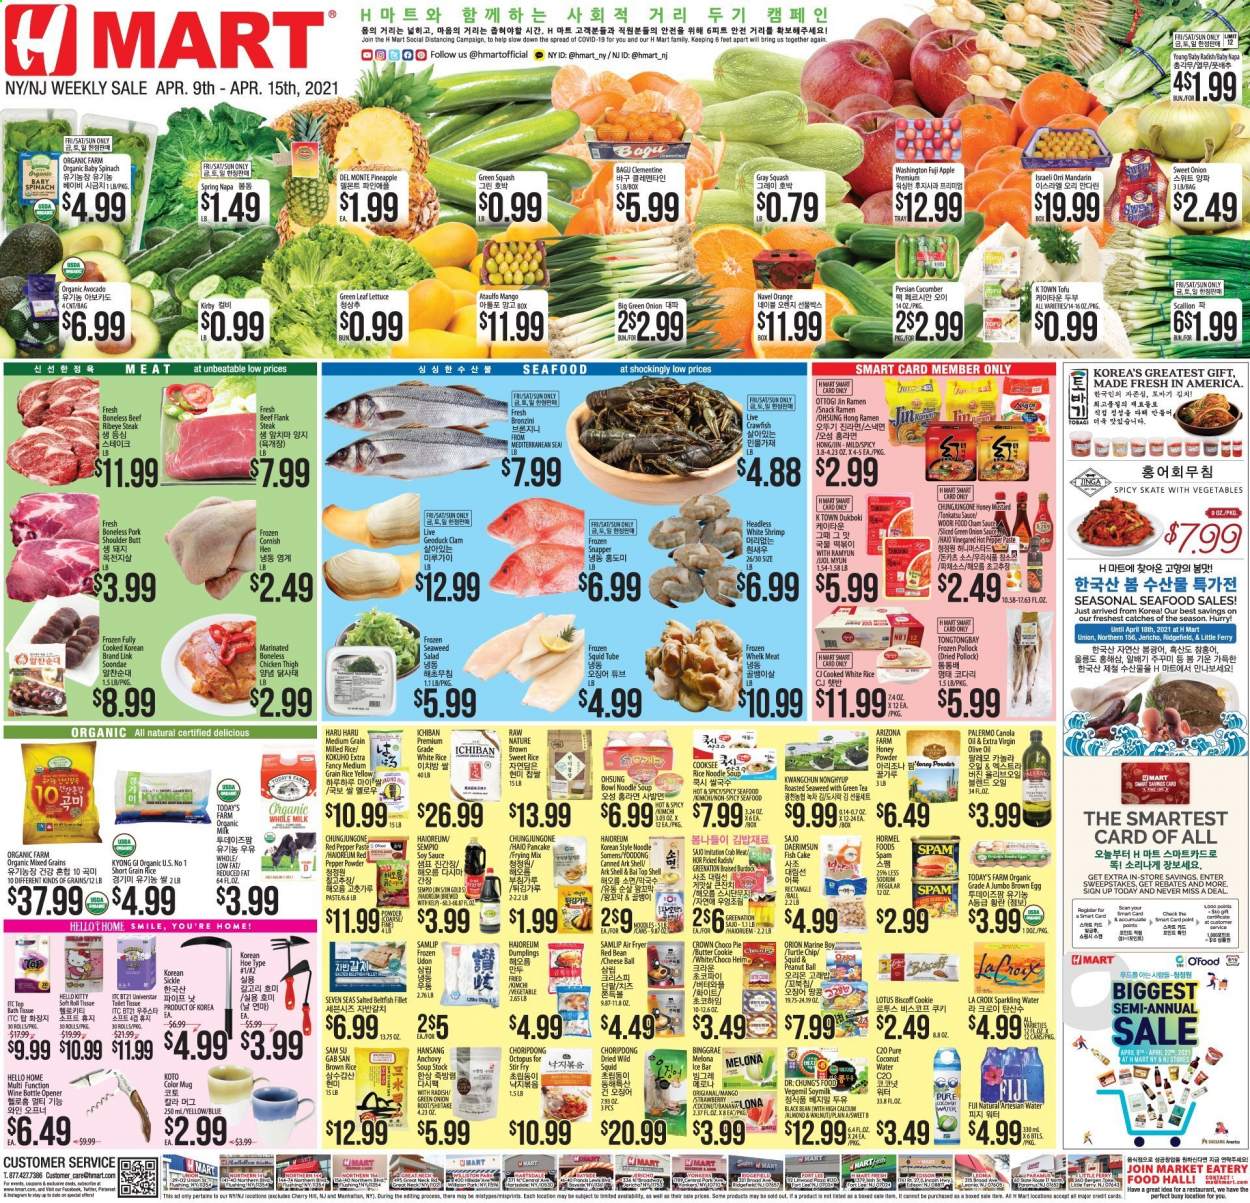 thumbnail - Hmart Flyer - 04/09/2021 - 04/15/2021 - Sales products - spinach, lettuce, green onion, mango, squid, seafood, shrimps, ramen, soup, sauce, pancakes, noodles, Hormel, Spam, cheese, tofu, milk, eggs, Ola, snack, seaweed, anchovies, brown rice, rice, white rice, short grain rice, soy sauce, extra virgin olive oil, oil, honey, coconut water, AriZona, Bai, sparkling water, tea, steak, pork meat, pork shoulder, Lotus, mug, bottle opener, bowl. Page 1.